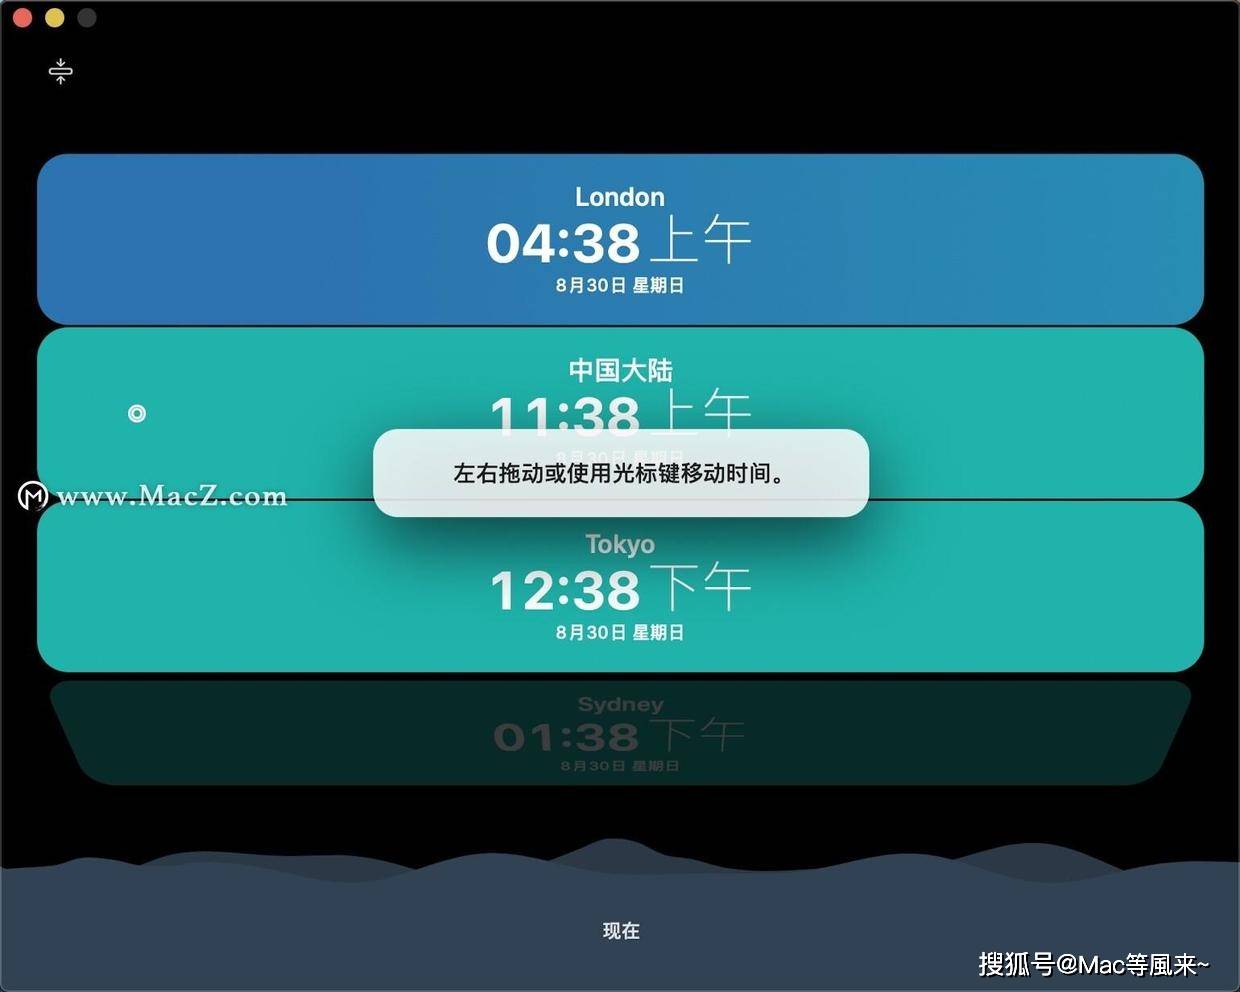 Overlap for mac(免费时区转换软件)